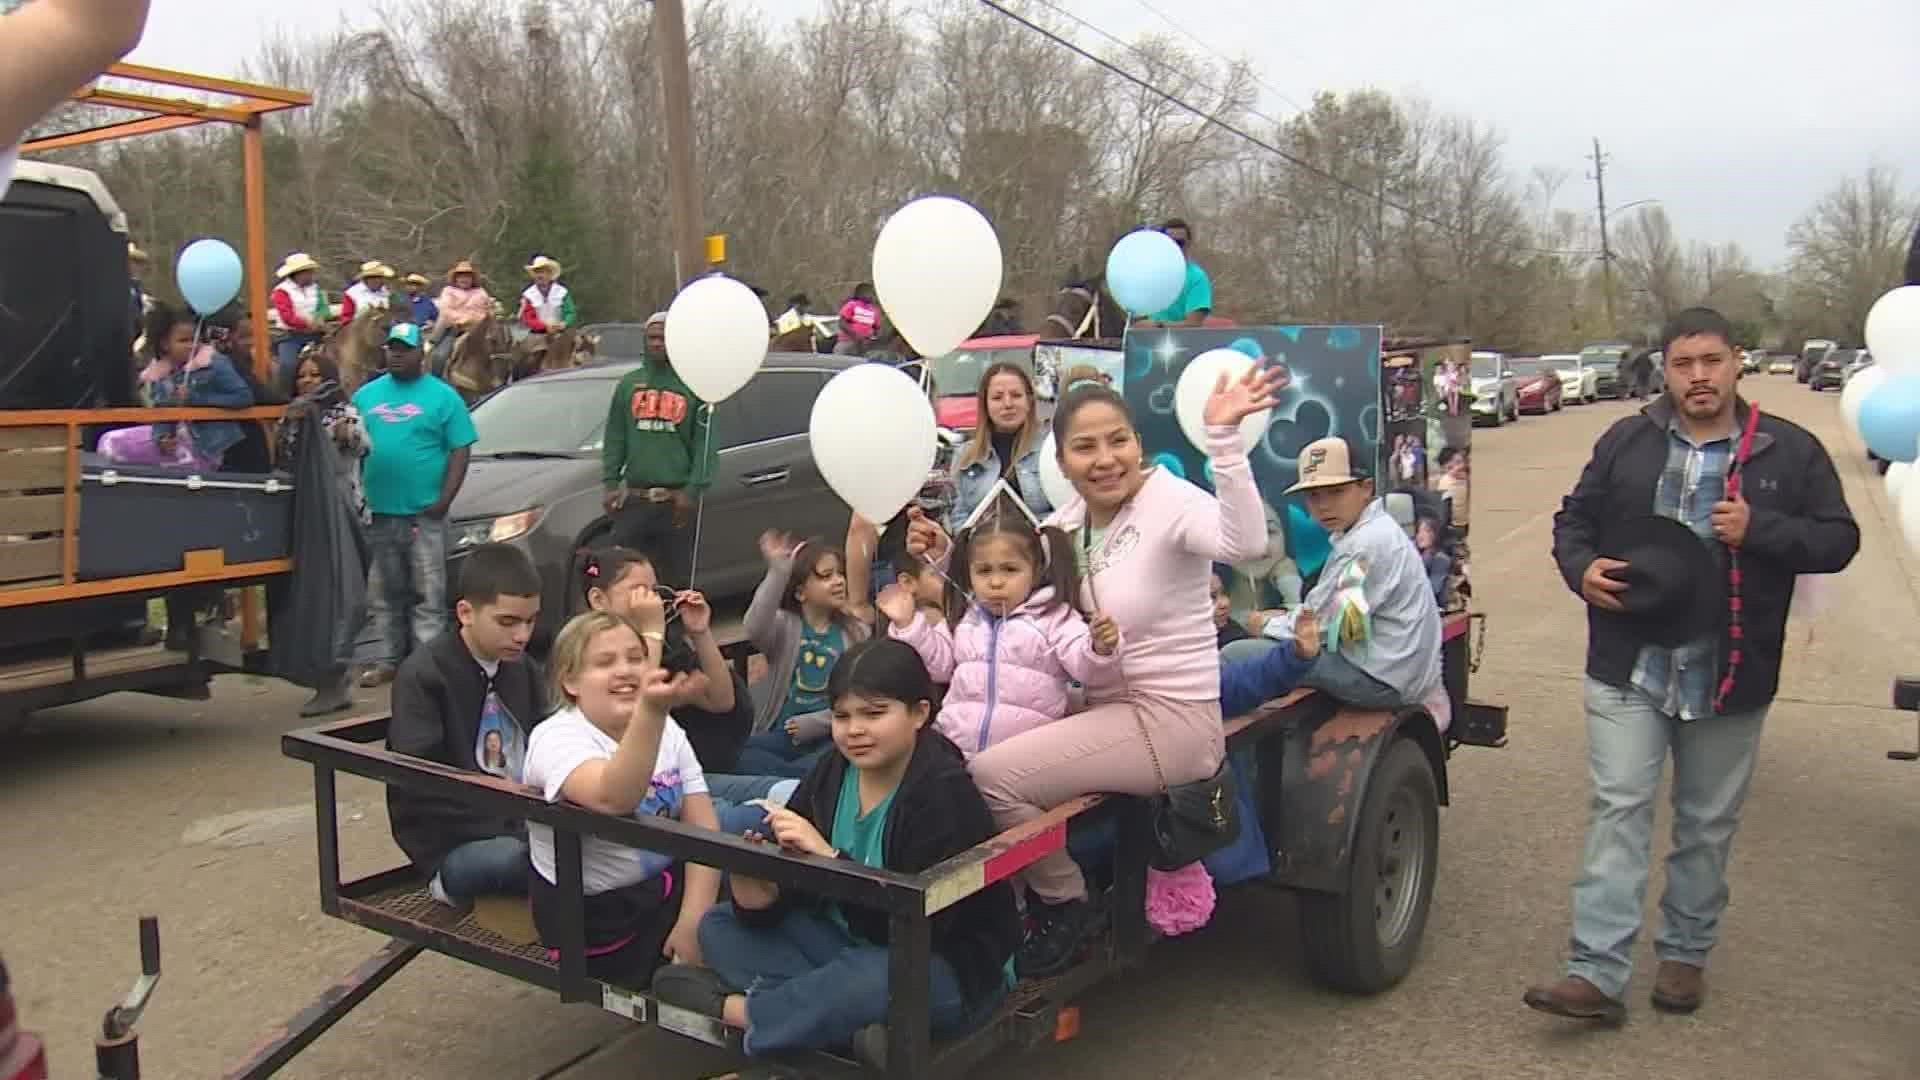 The community came together for a trail ride in southeast Houston in honor of 9-year-old Arlene Alvarez.